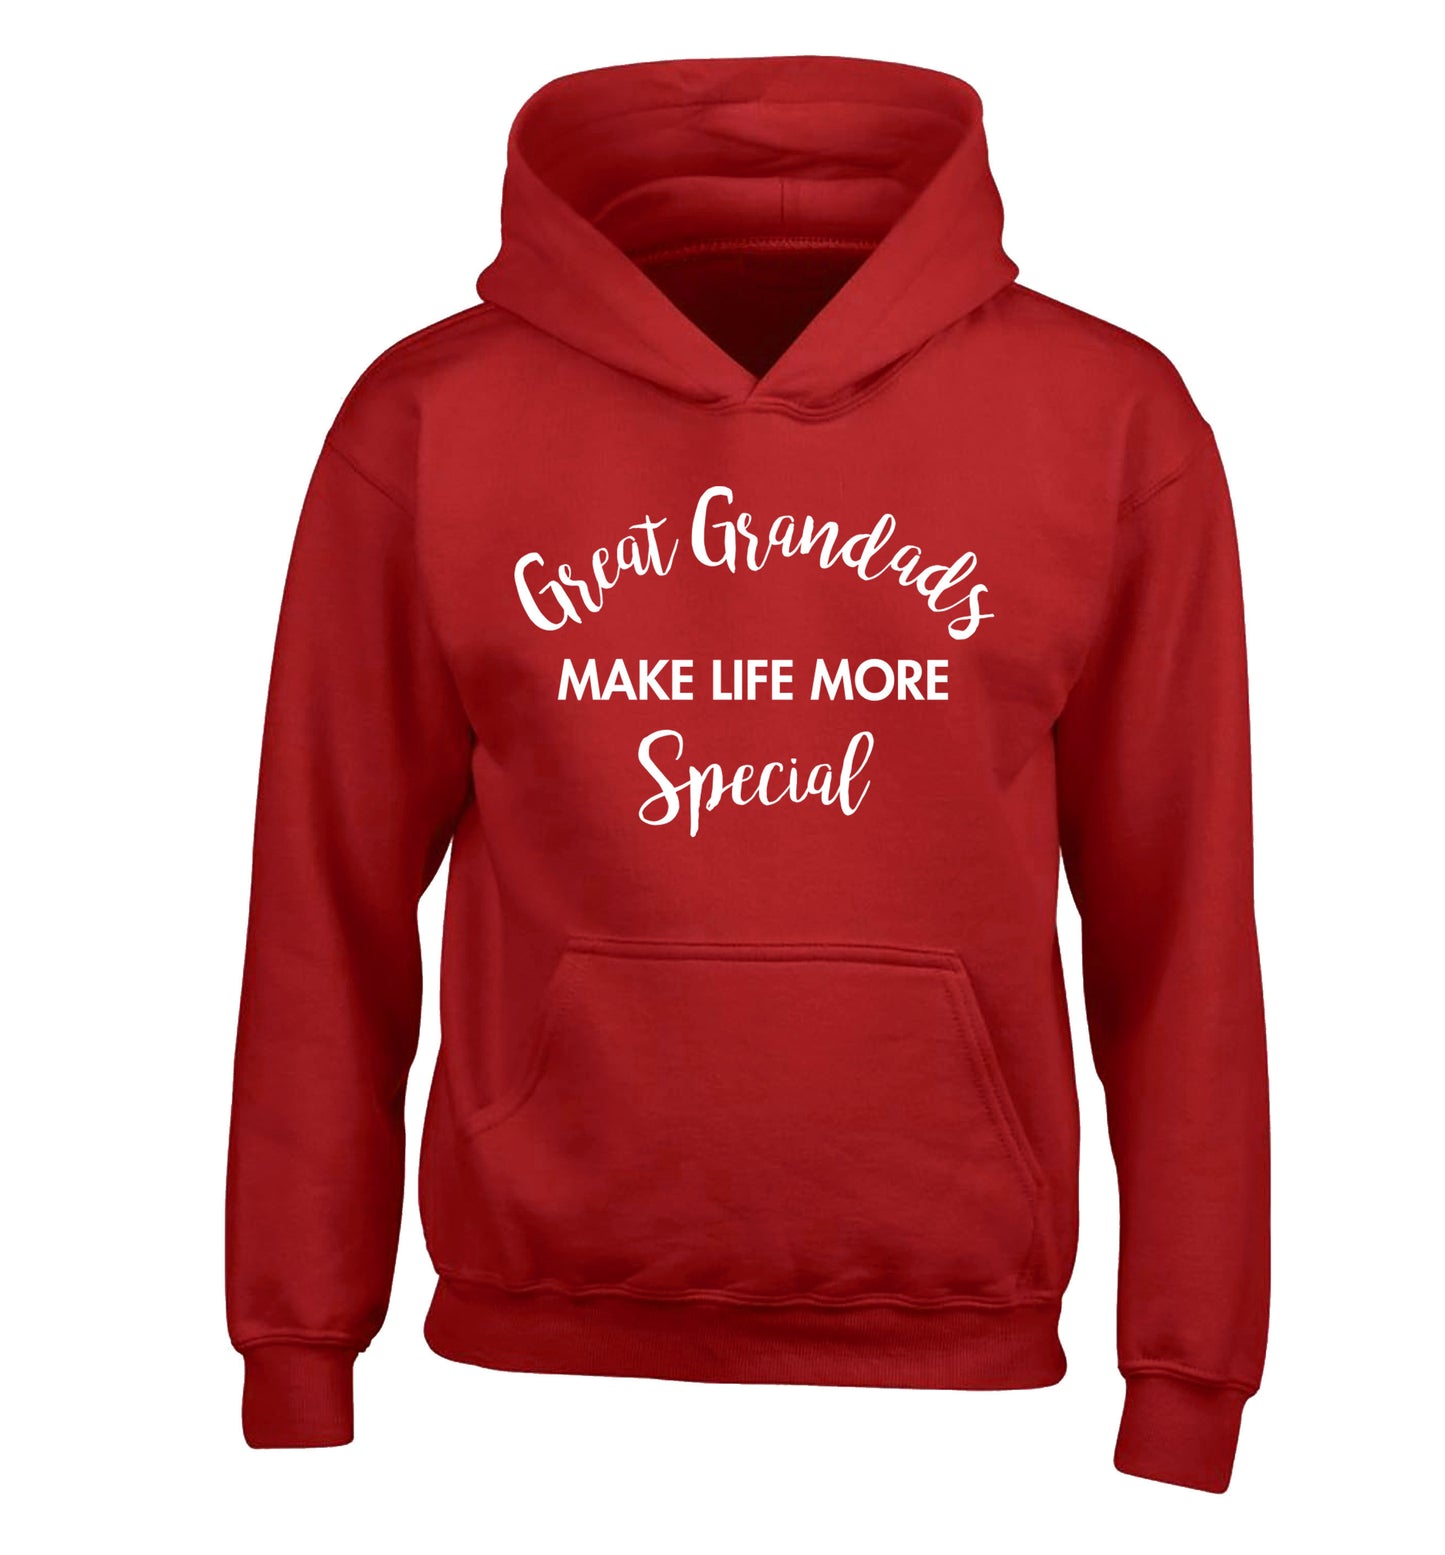 Great Grandads make life more special children's red hoodie 12-14 Years